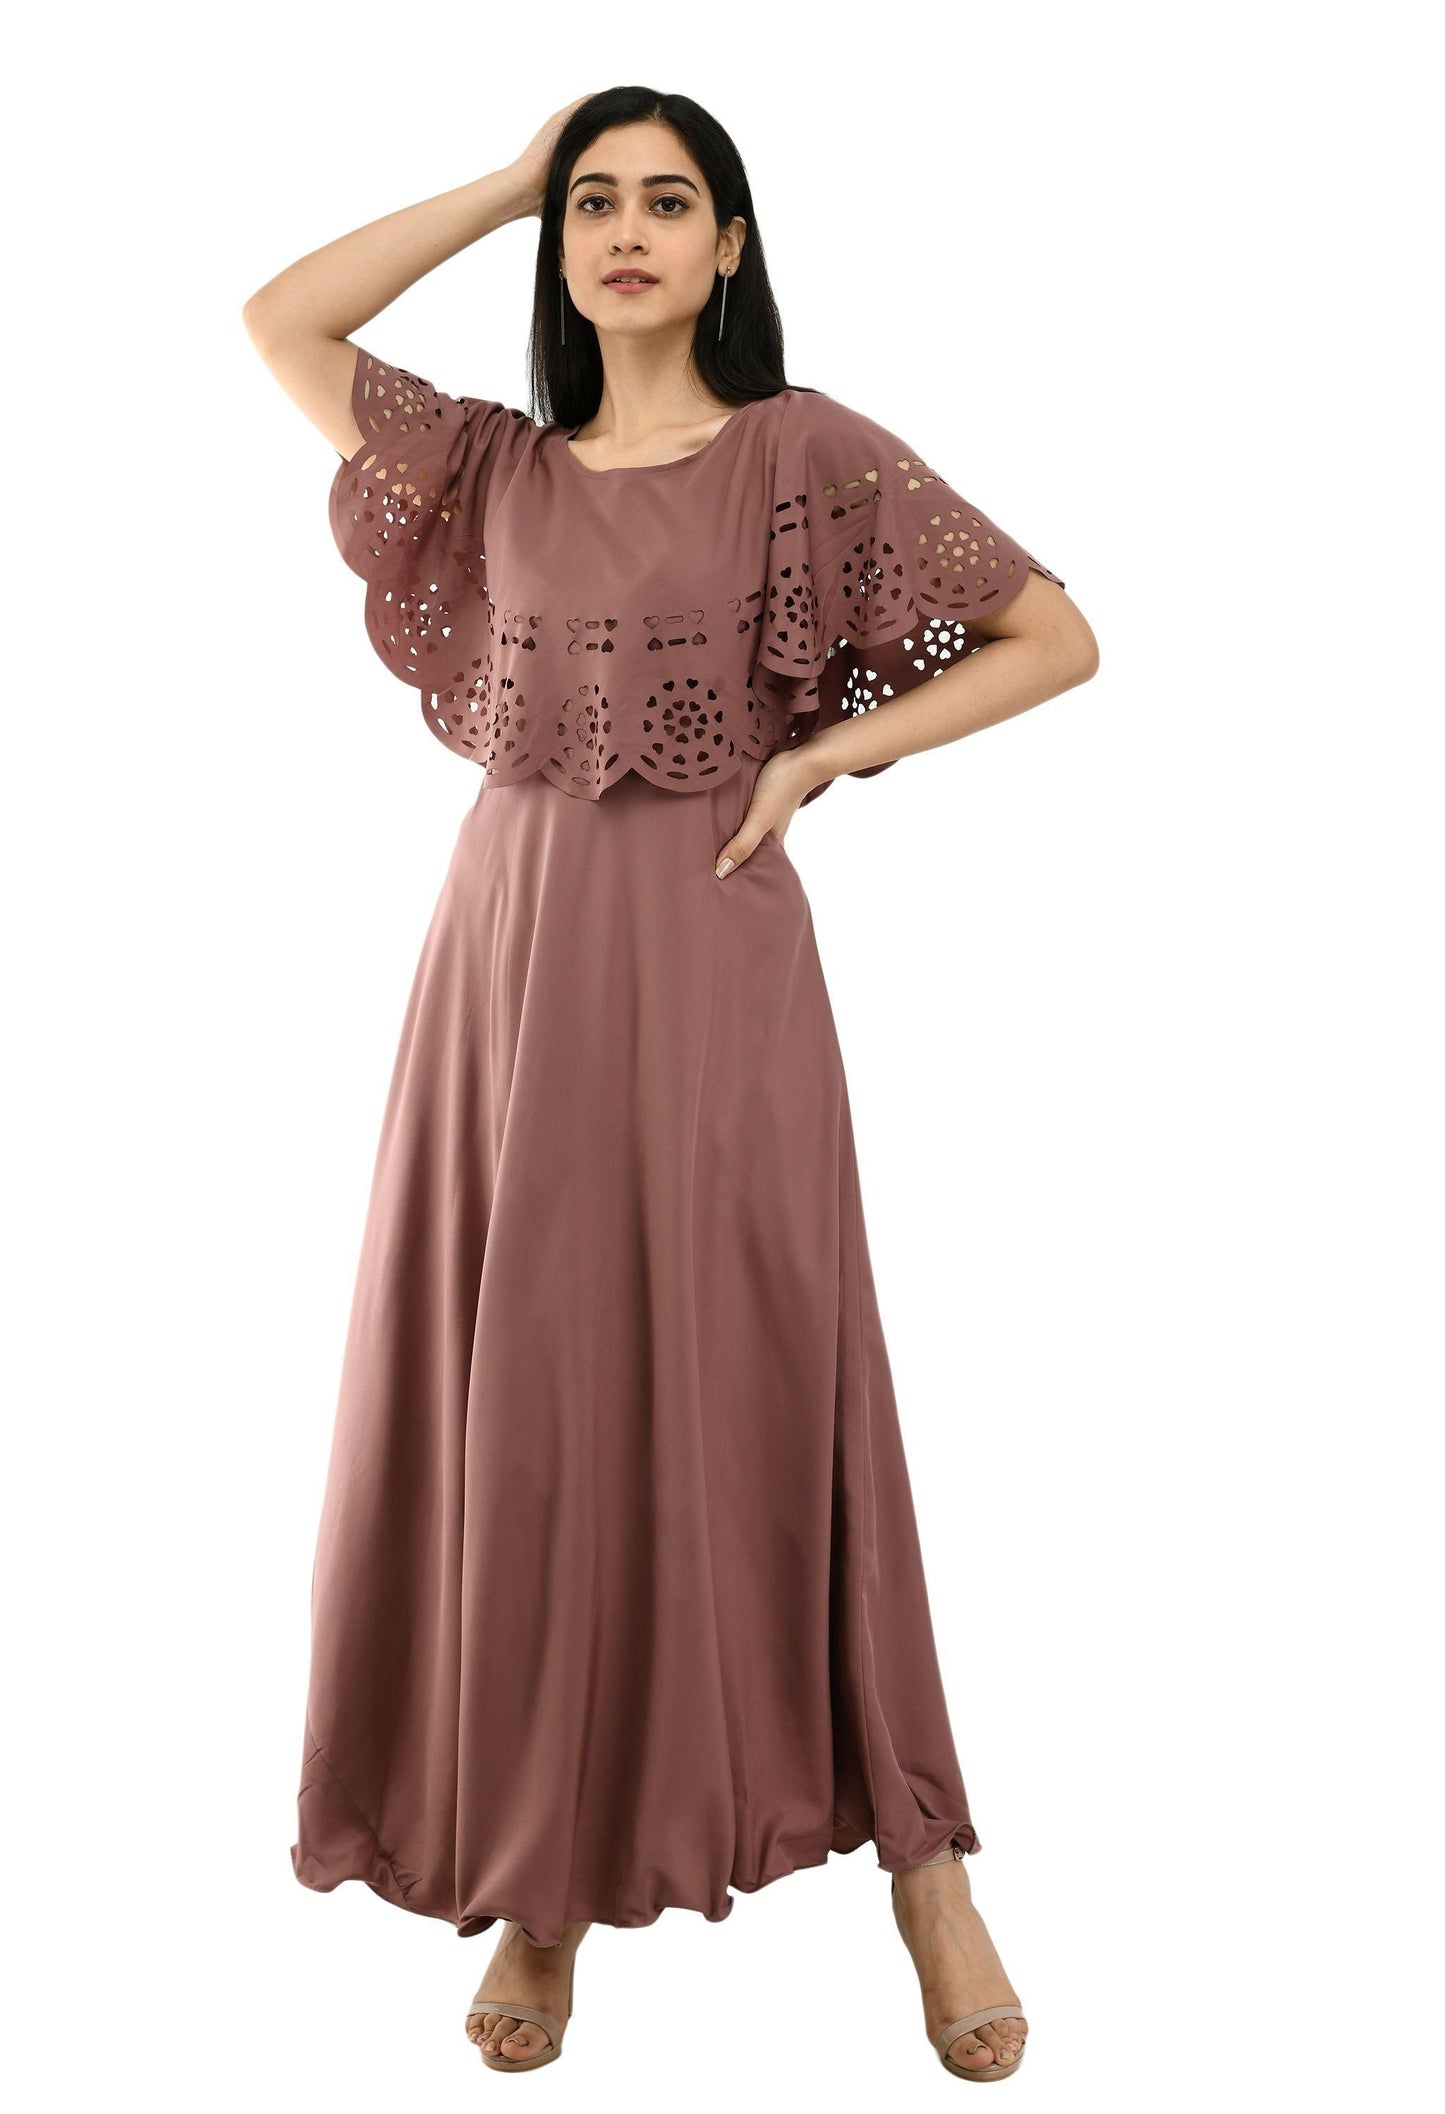 Women's Polyester Solid Maxi Dress